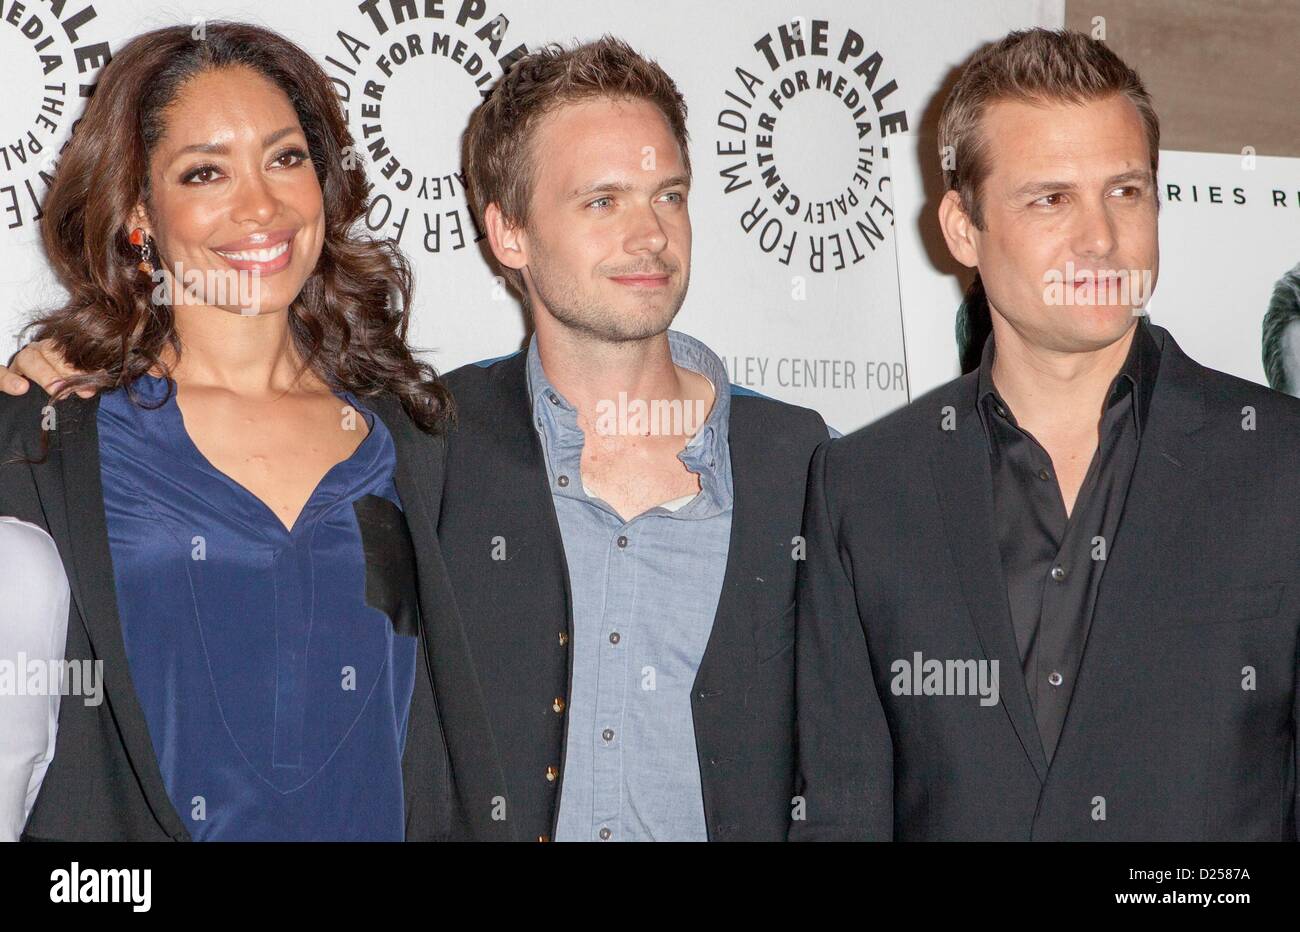 Beverly Hills, California, USA. 14th January 2013. Gina Torres, Patrick J. Adams, Gabriel Macht in attendance for The Paley Center for Media Presents An Evening with SUITS, Paley Center for Media, Beverly Hills, CA January 14, 2013. Photo By: Emiley Schweich/Everett Collection Stock Photo